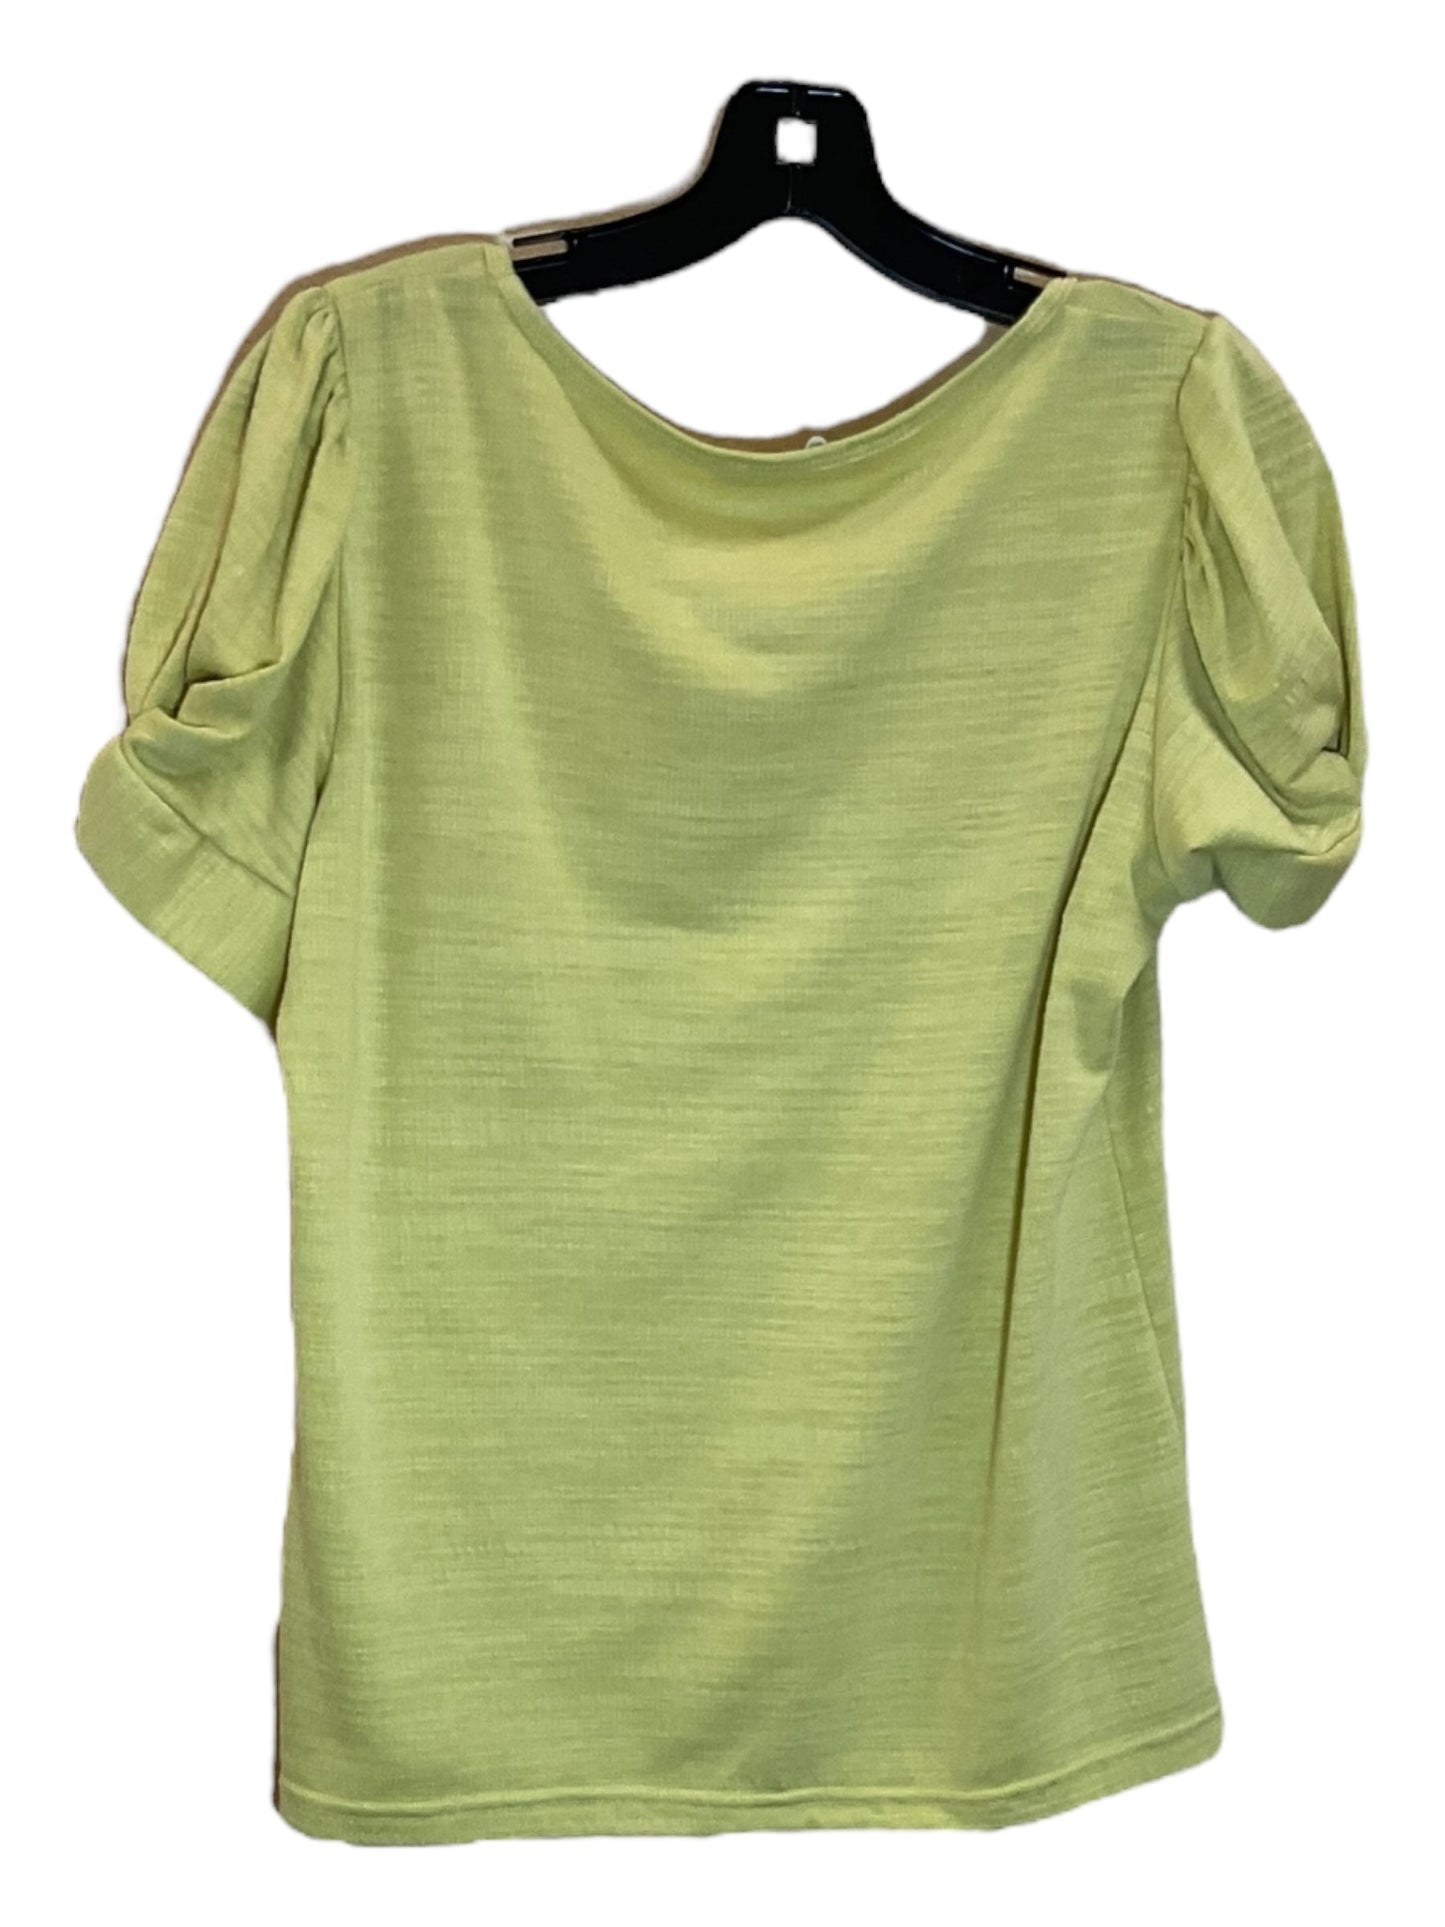 Green Top Short Sleeve Jane And Delancey, Size M